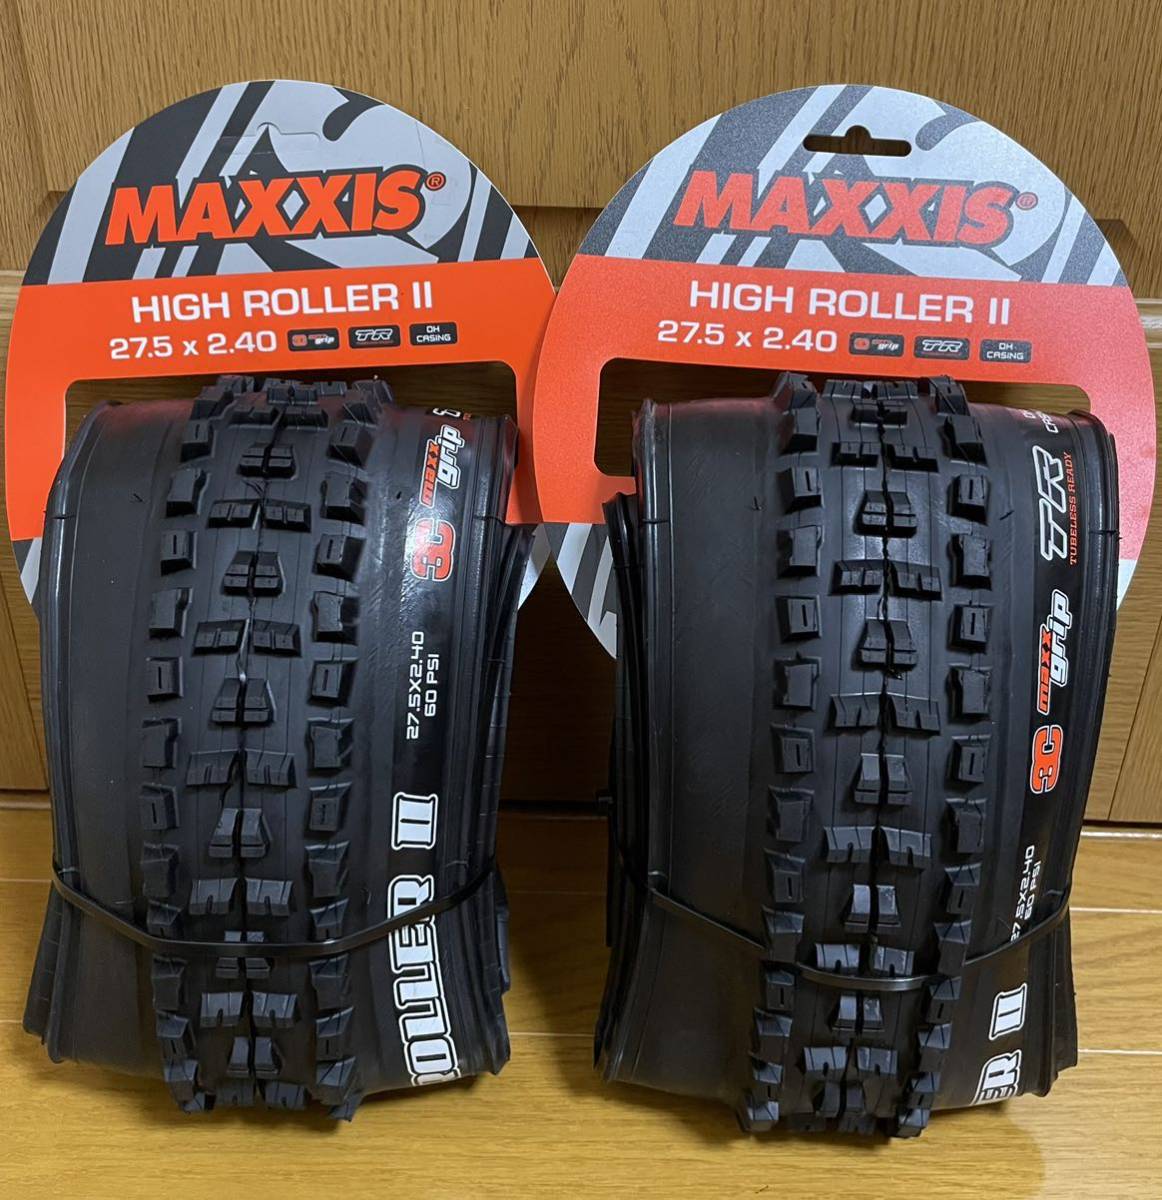 MAXXIS High RollerⅡ 27 5×2 40 2本セット 新品 マキシス｜PayPayフリマ